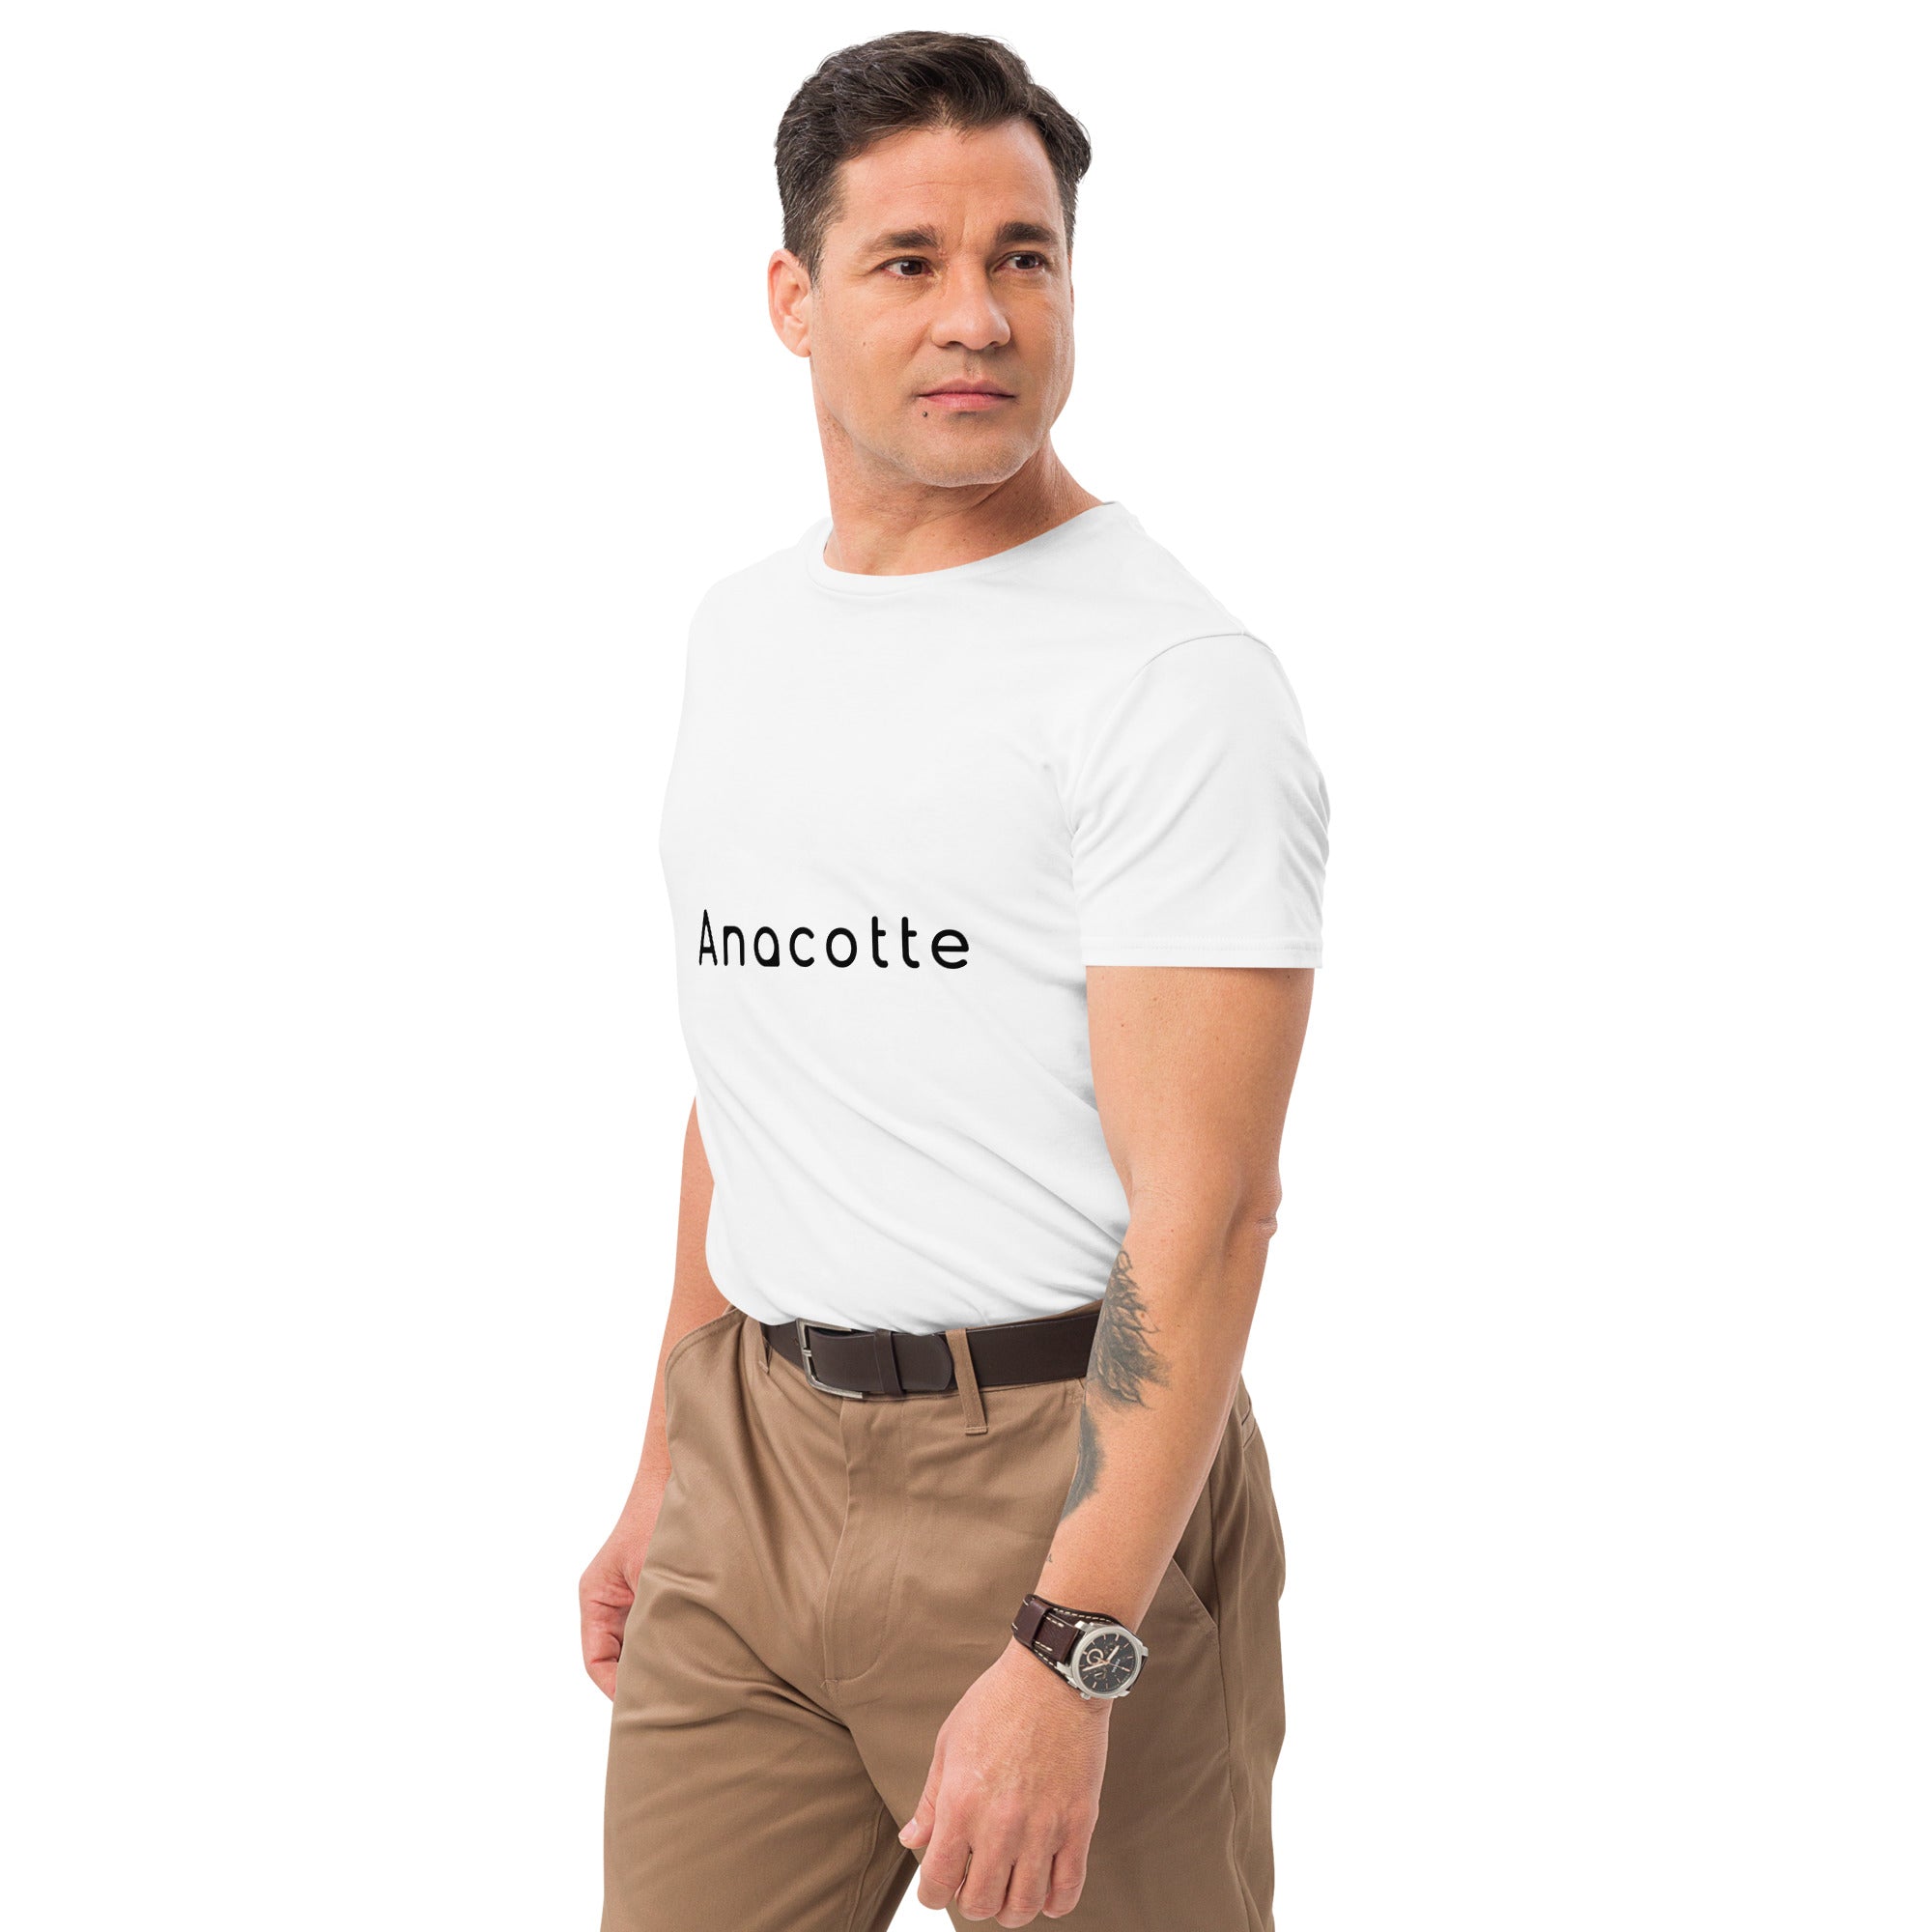 Anacotte Men's Premium Cotton T-Shirt - Ultimate Comfort and Style